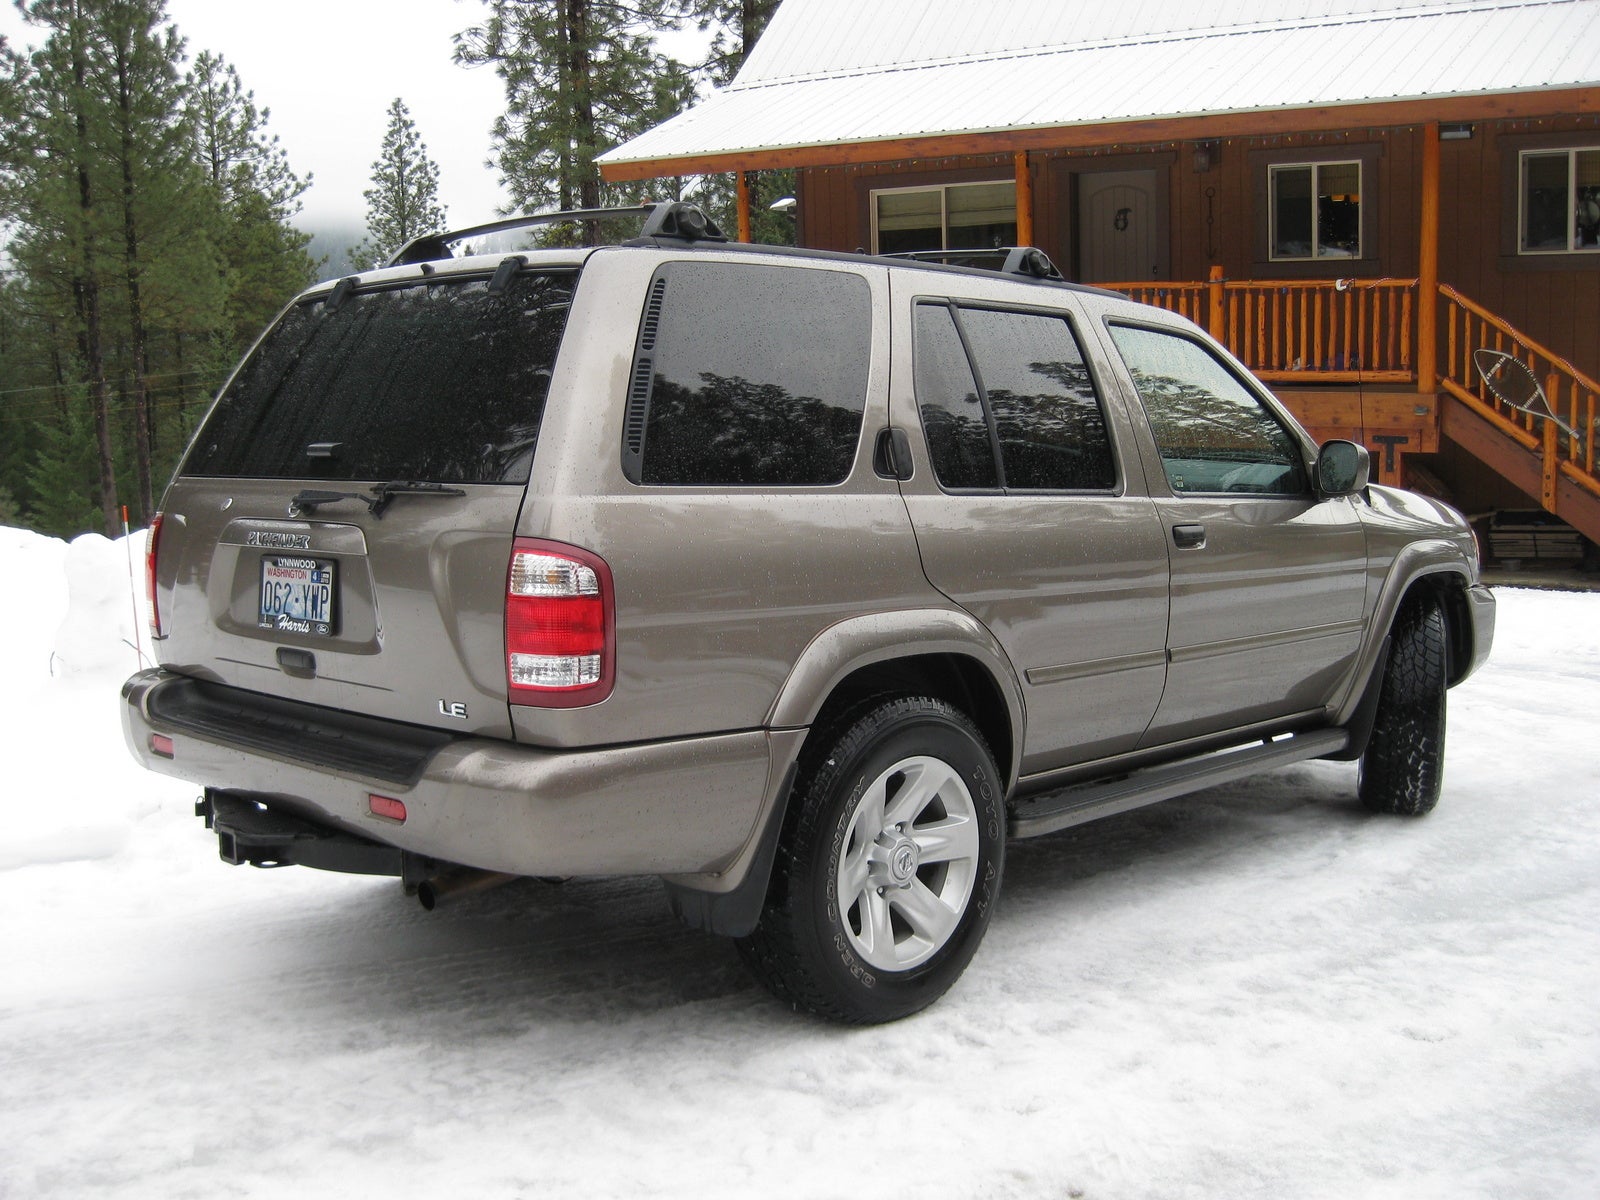 2002 Nissan pathfinder le specifications #1